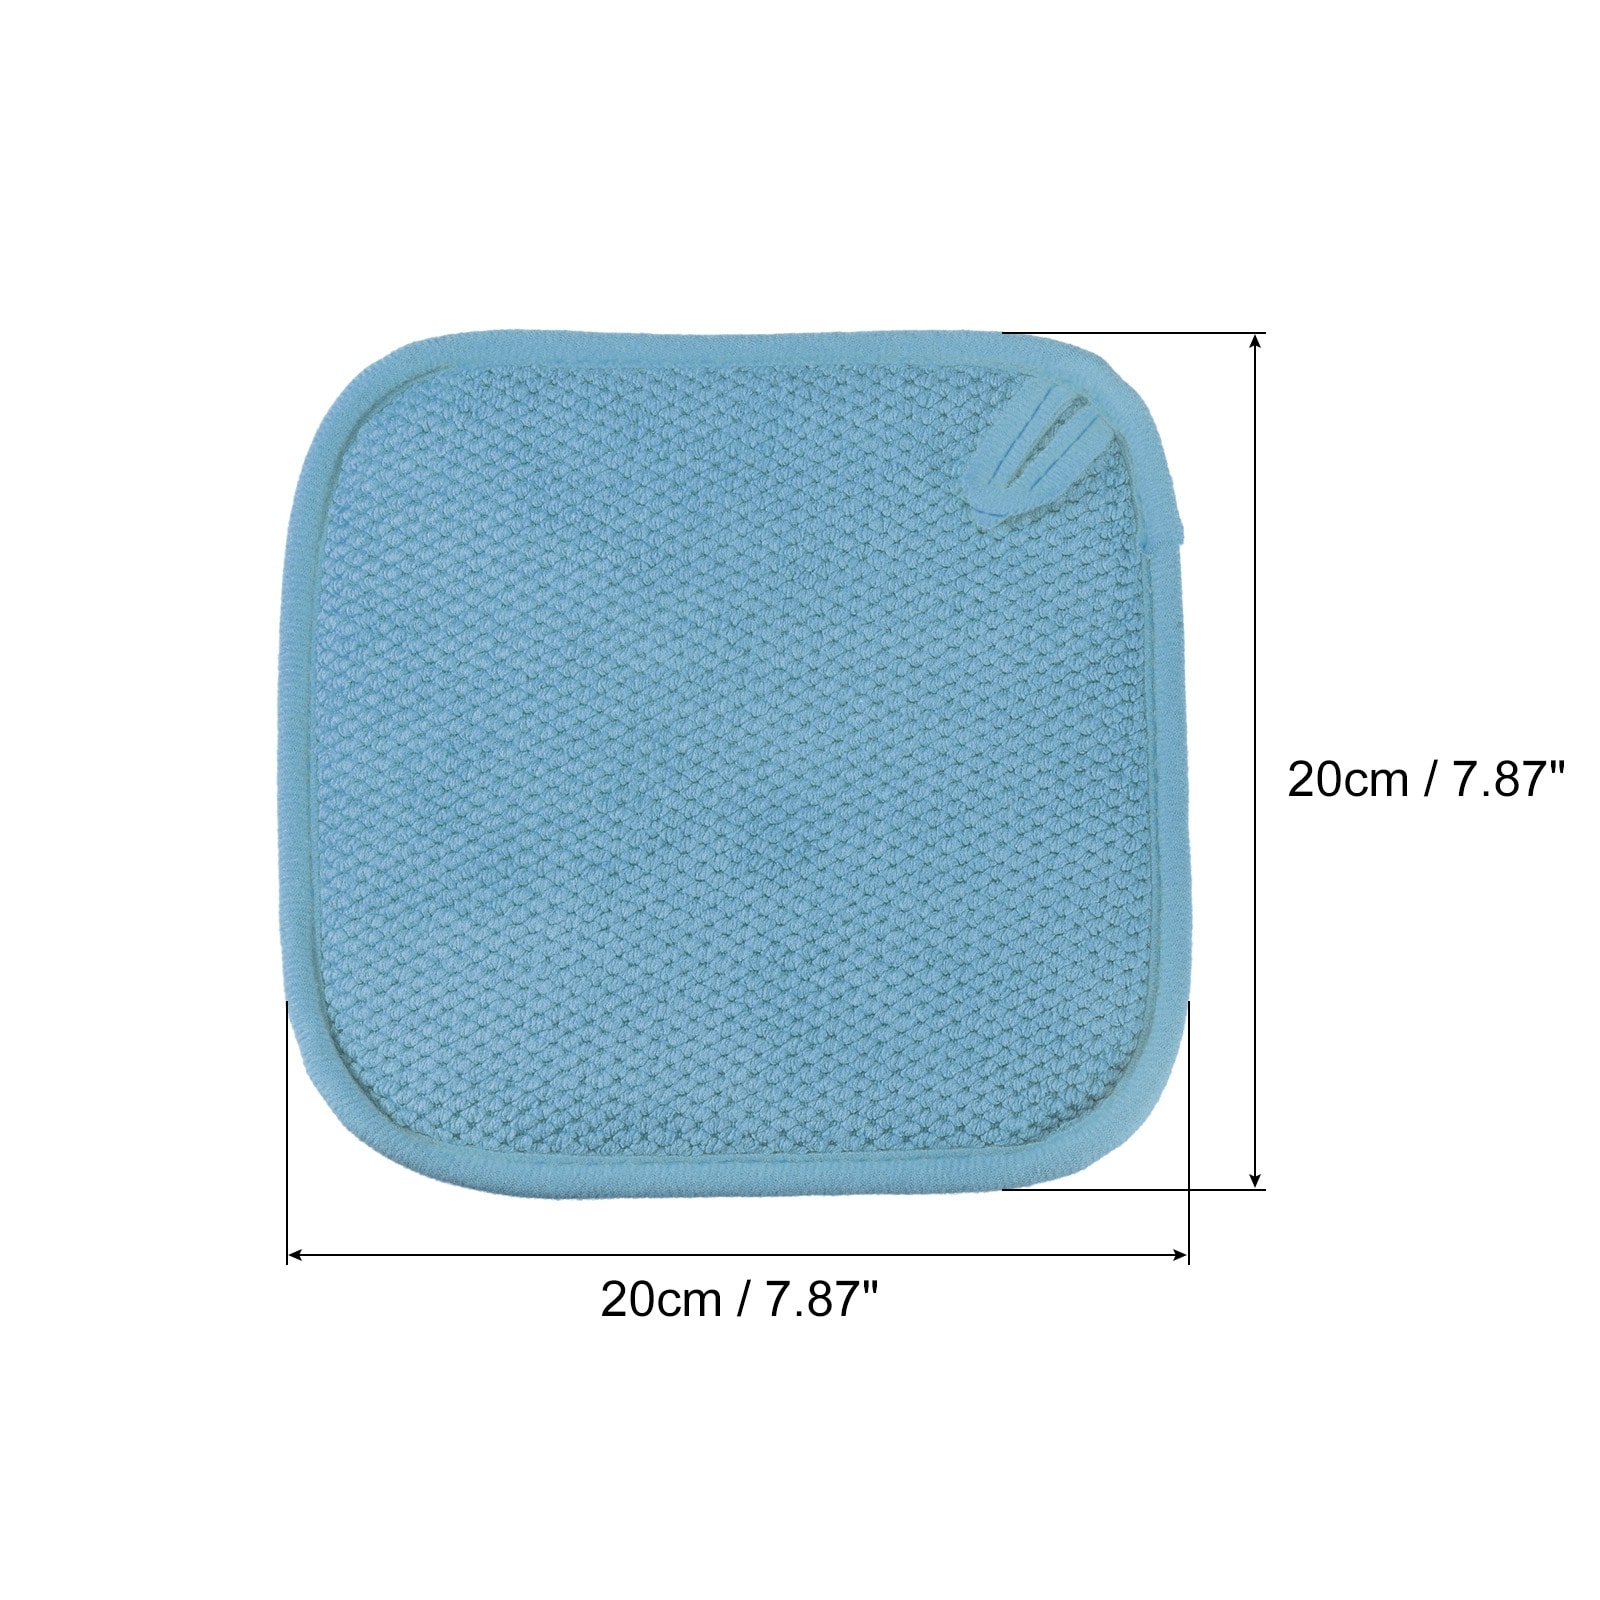 https://ak1.ostkcdn.com/images/products/is/images/direct/065f0b6727de35a7dc244d06ab4aea4a0baefcdd/Dish-Drying-Mat%2C-7.87%22-x-7.87%22-Microfiber-Dishes-Drainer-Mats-Red.jpg